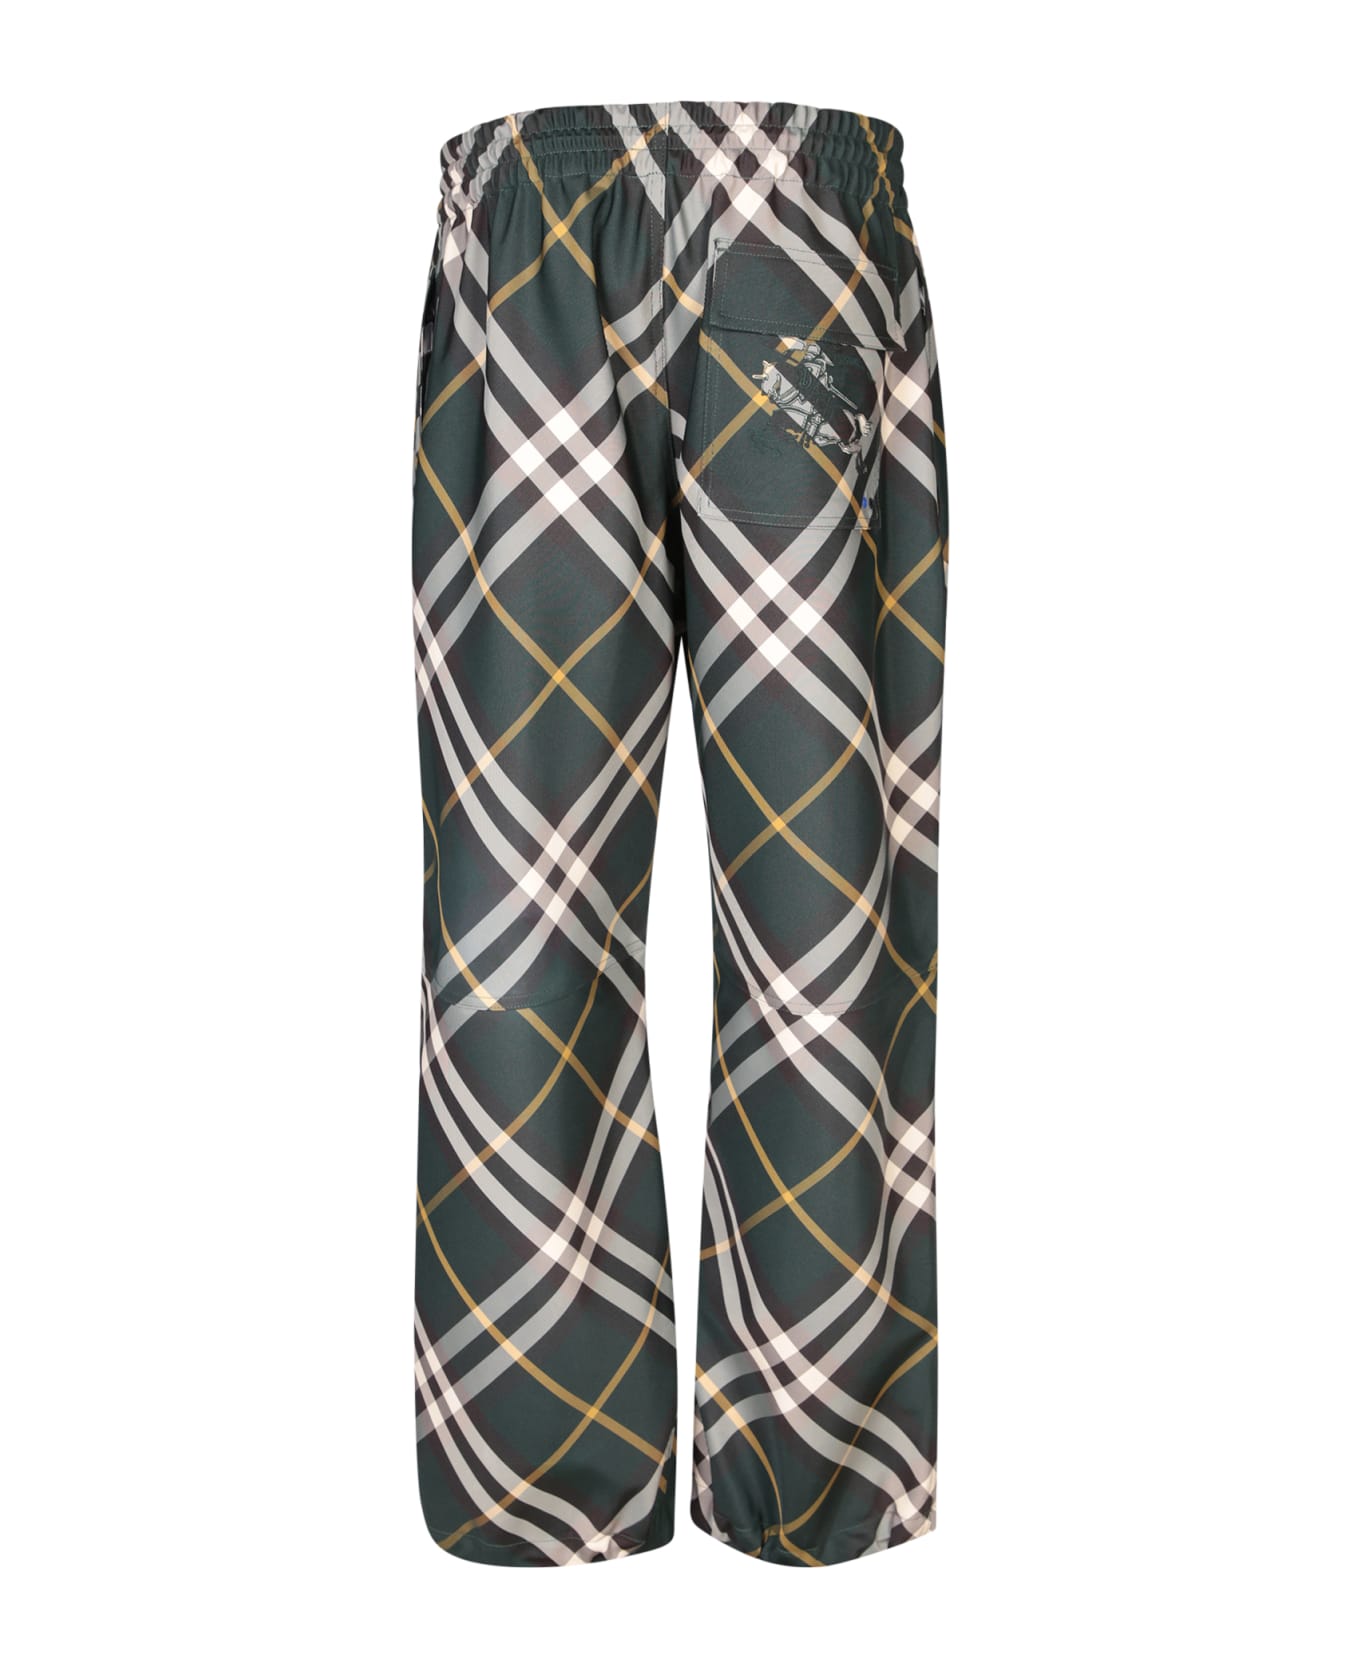 Burberry Wide-leg Equestrian Knight Motif Checked Trousers - Green ボトムス